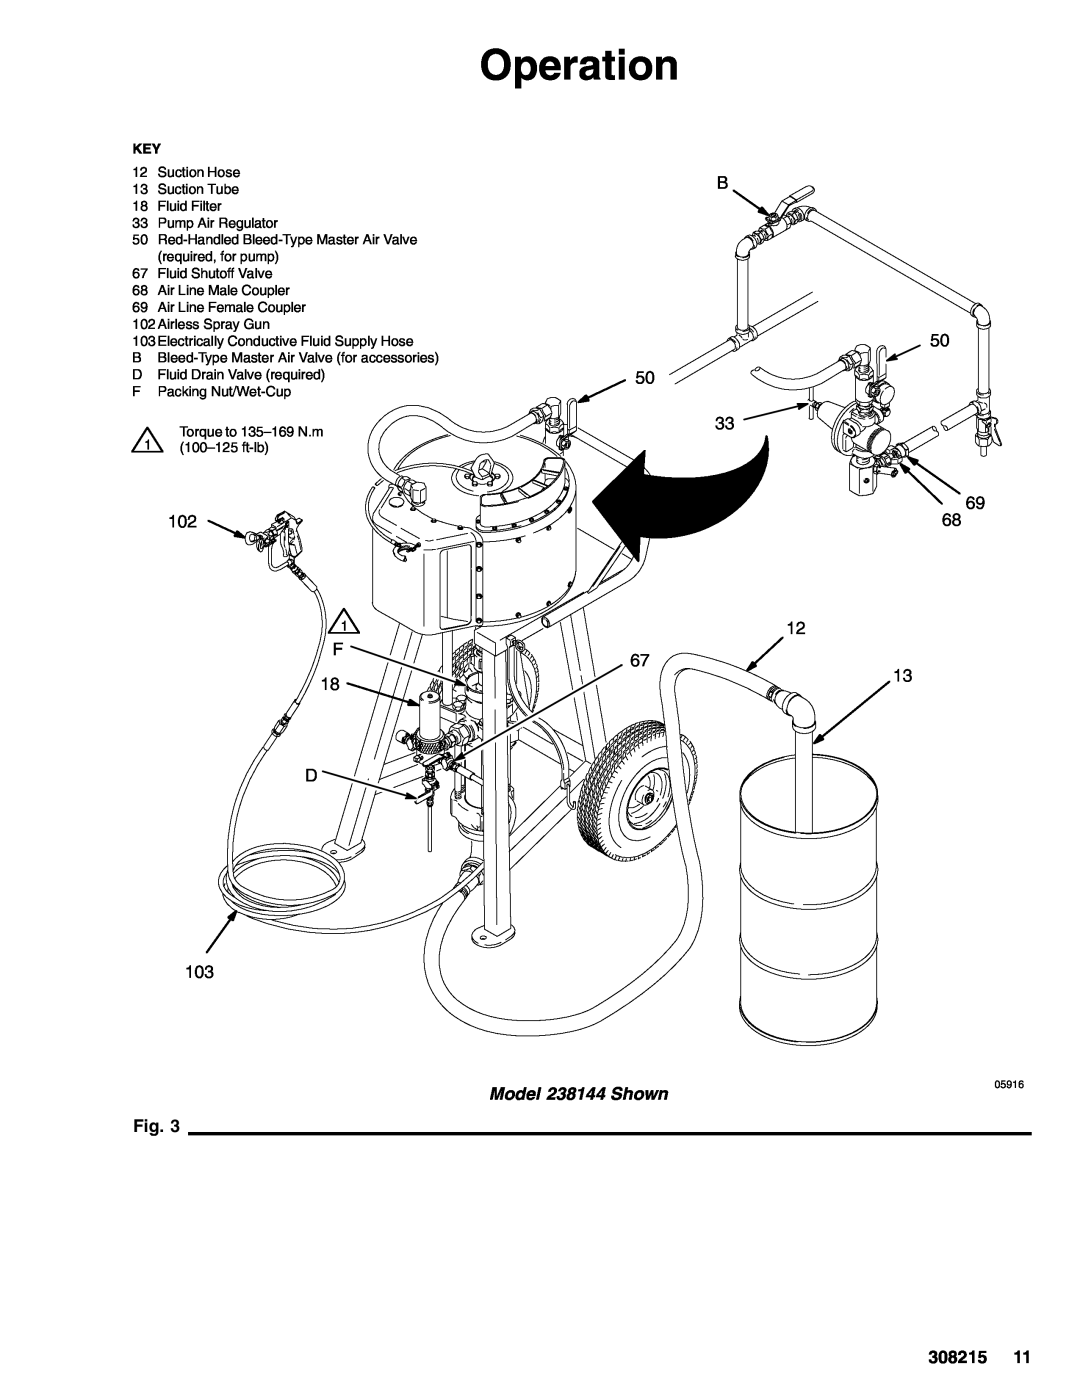 Graco Inc 222973, 308215L important safety instructions Operation, Model 238144 Shown, Torque to 135-169 N.m 